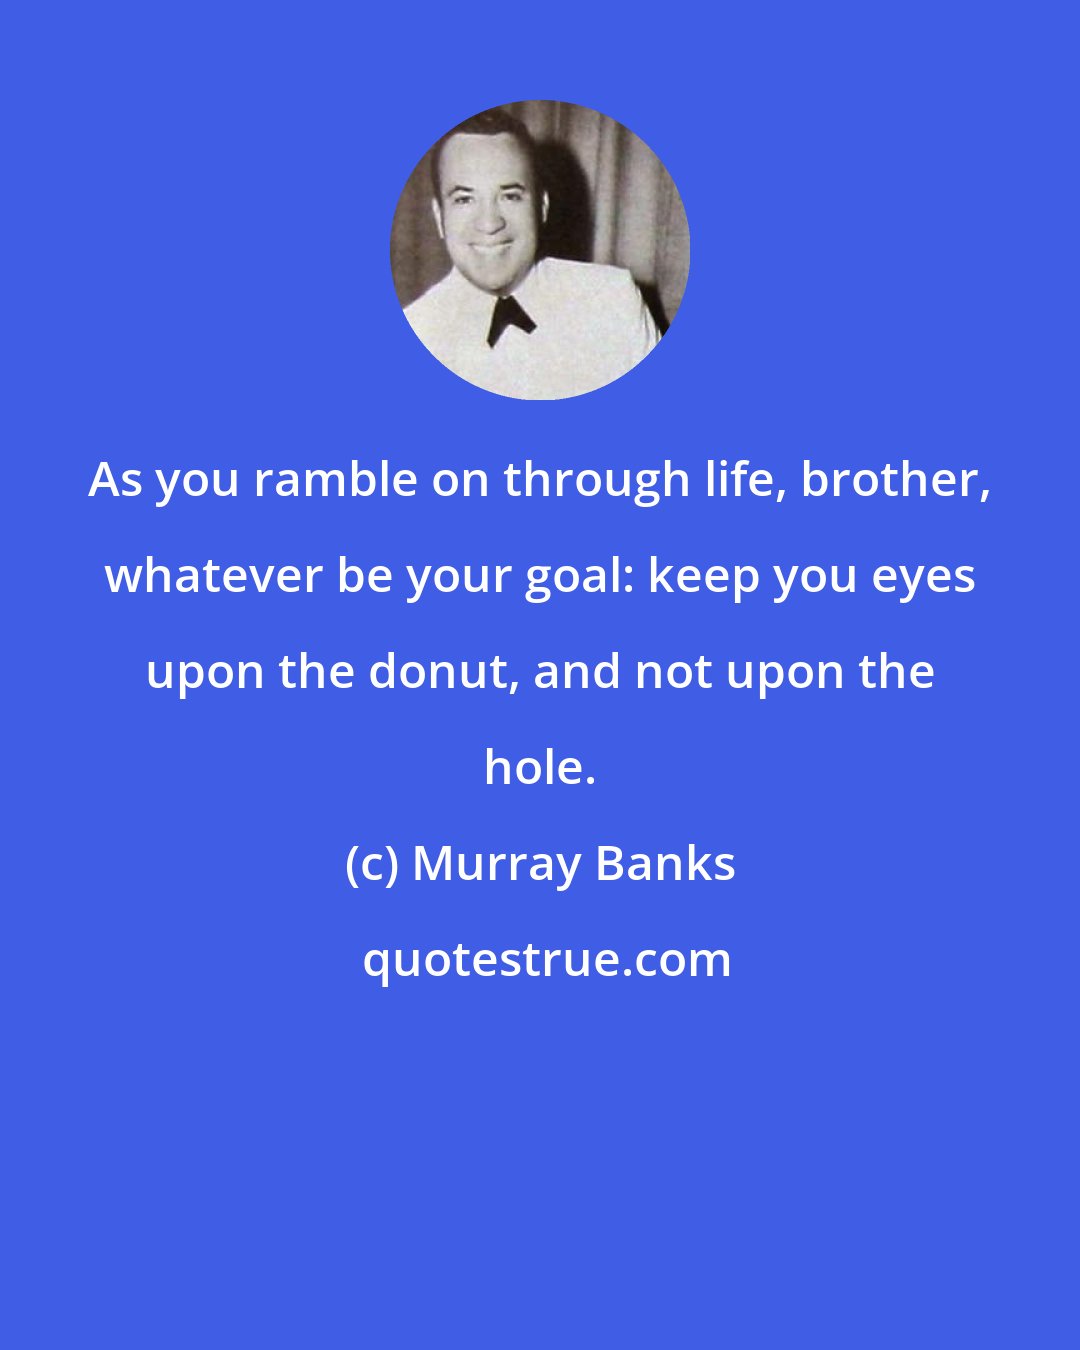 Murray Banks: As you ramble on through life, brother, whatever be your goal: keep you eyes upon the donut, and not upon the hole.